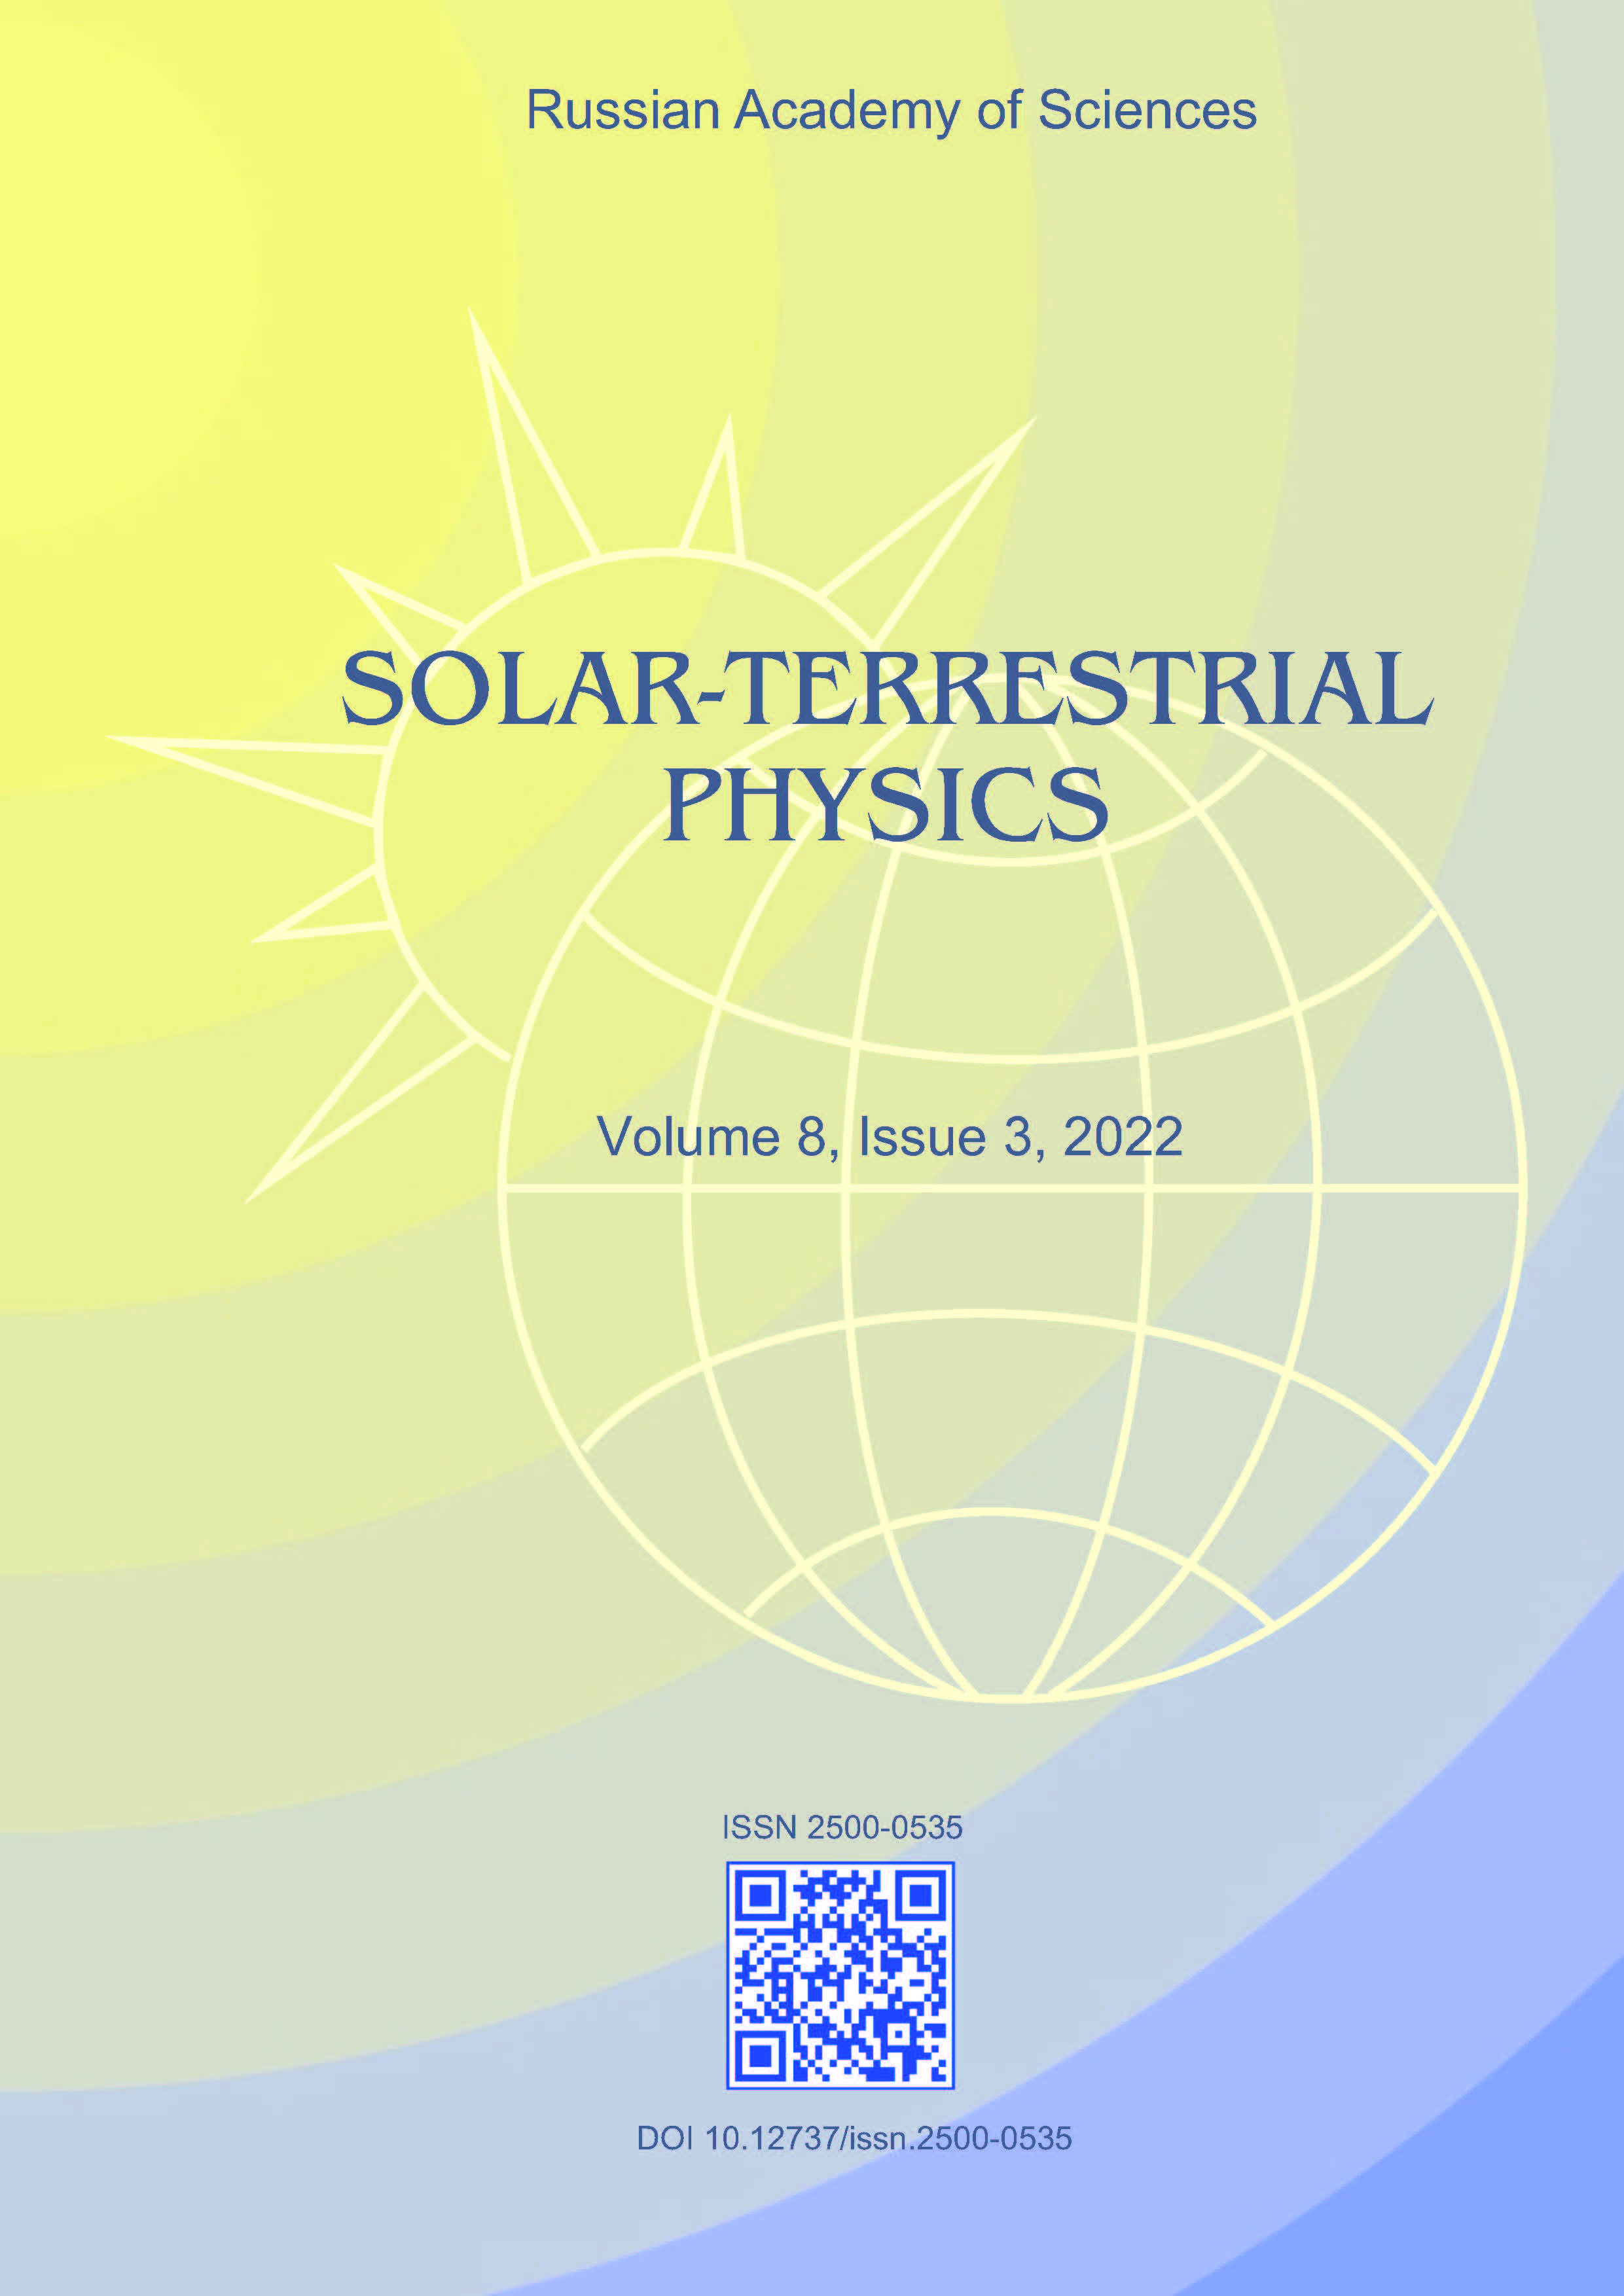                         Structure of groups of eigenfrequencies in spectra of geomagnetic pulsations in the nightside magnetosphere
            